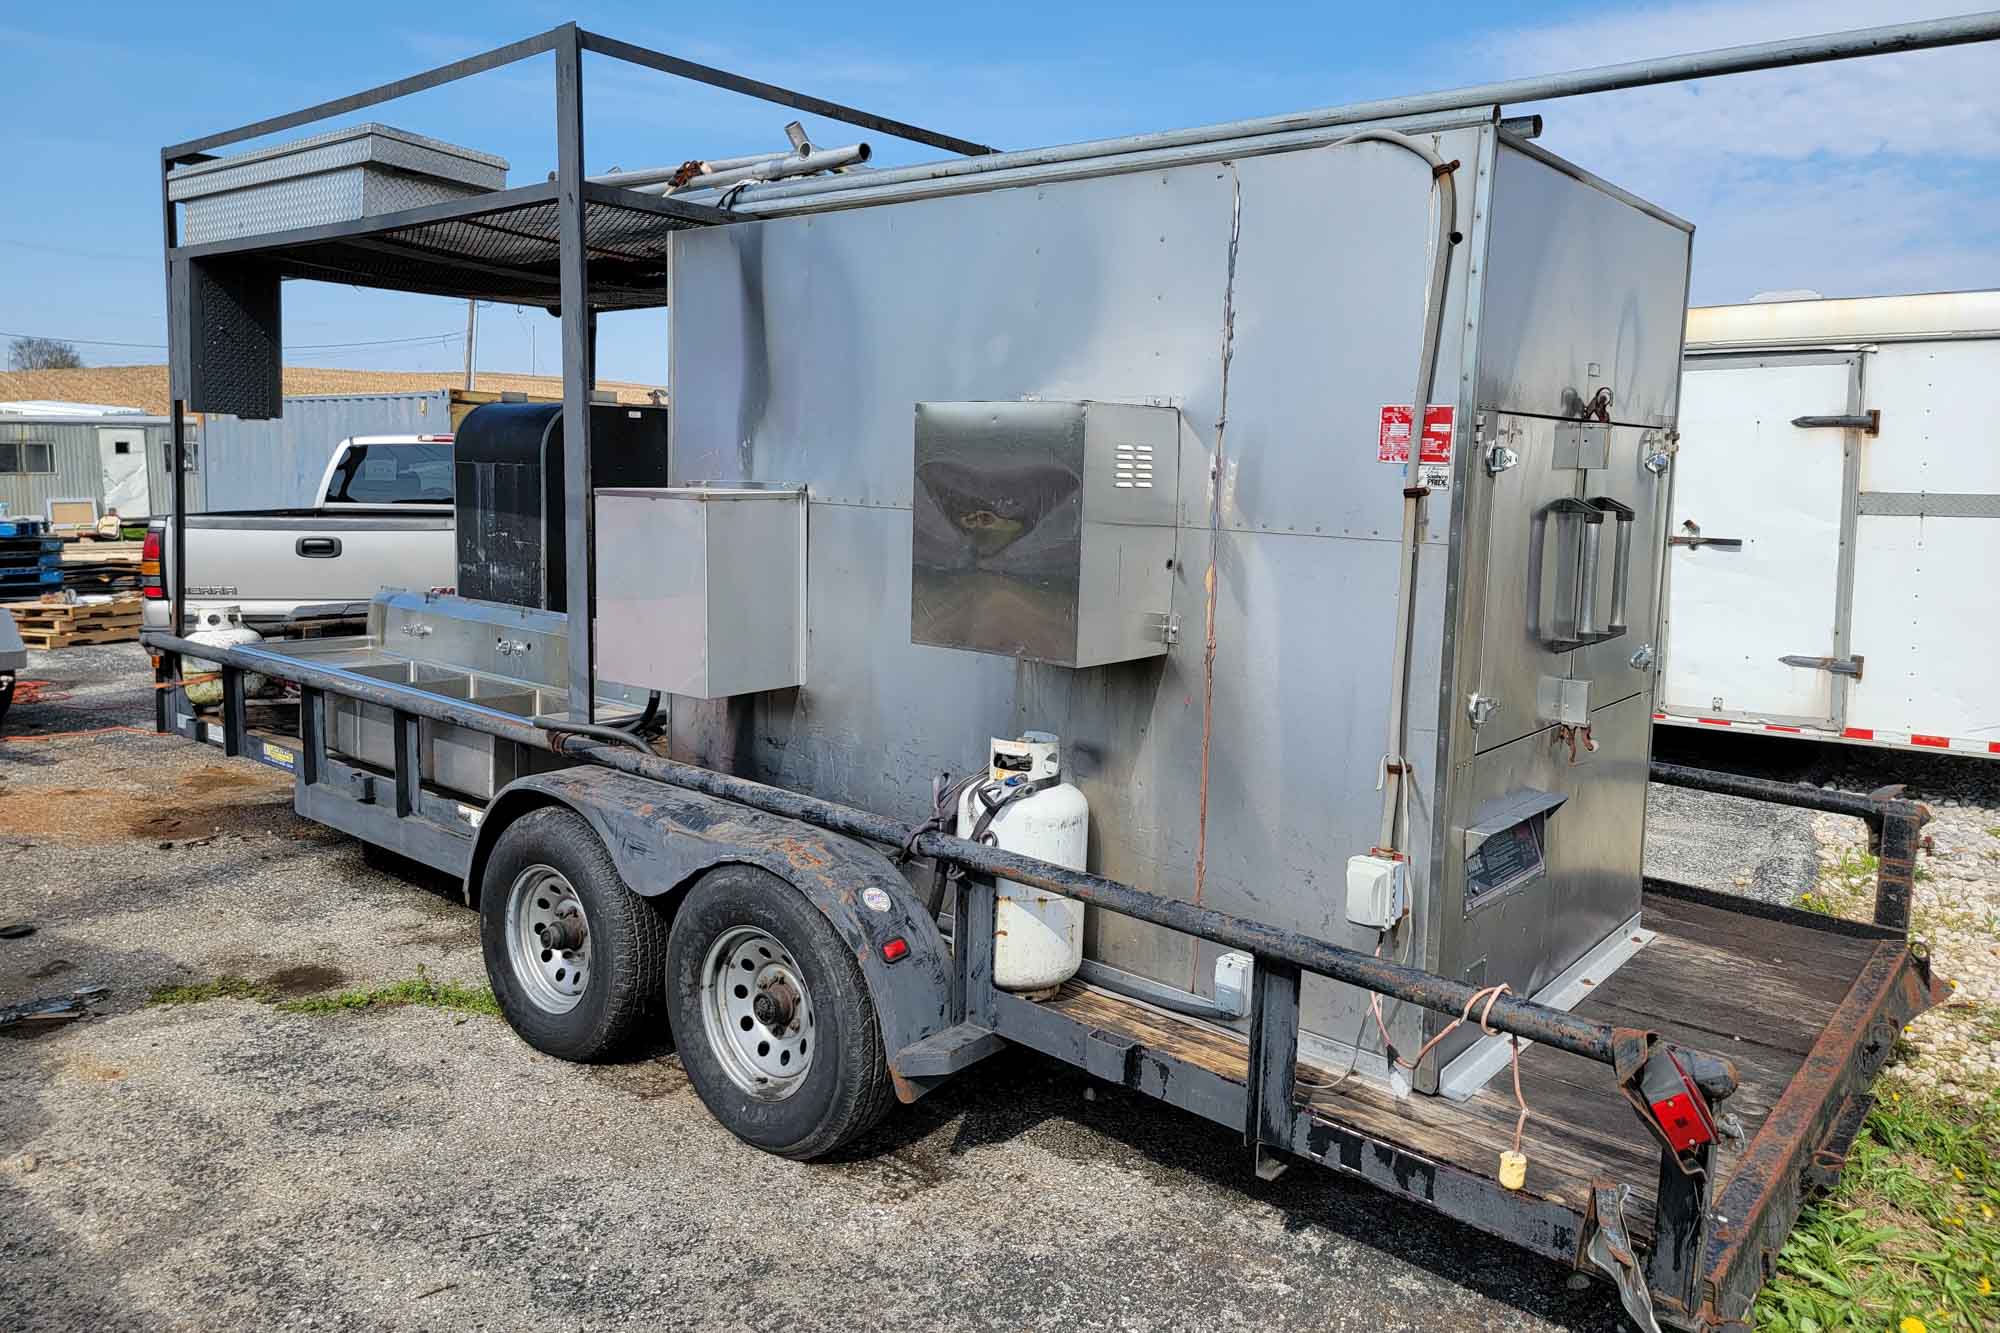 20' Double-Axle Trailer with SPK 1400 Southern Pride, Old Hickory Smoker 100, 3-Bowl Sink, and Tent Parts